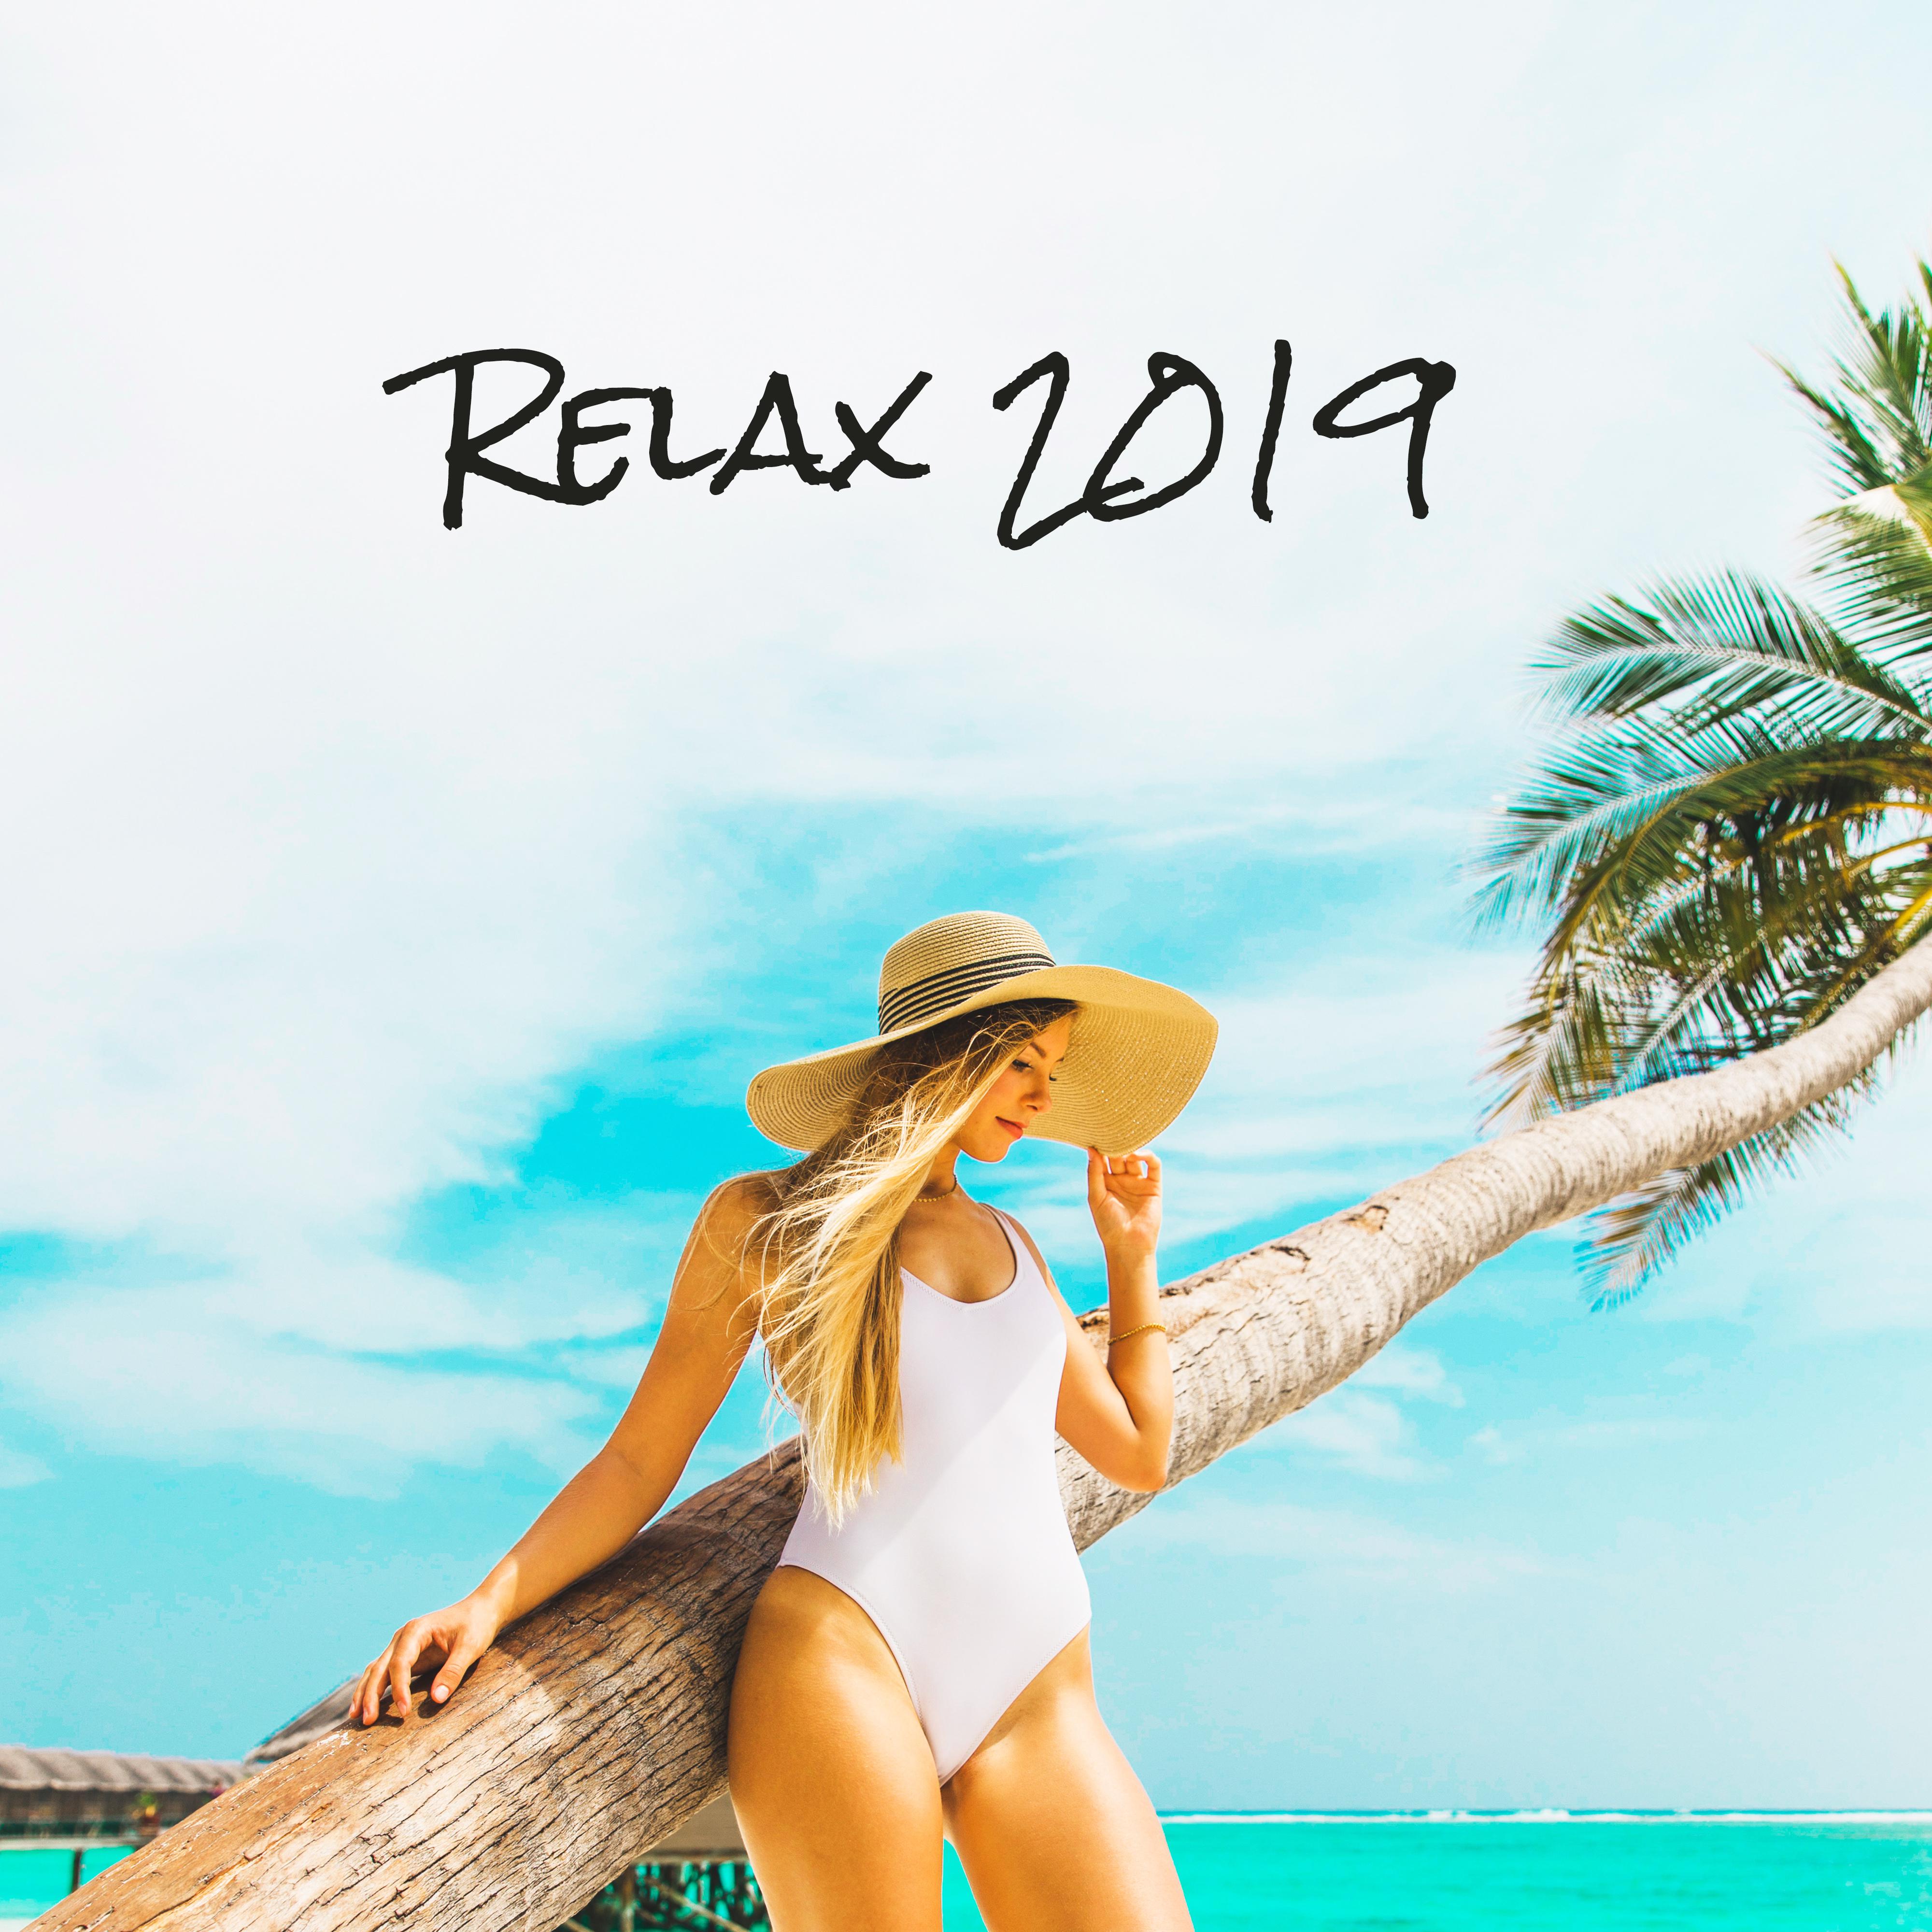 Relax 2019 – Summer Music, Lounge, Beach Chillout, Beach Coffee Chillout, Pure Mind, Ibiza Lounge, Music Zone